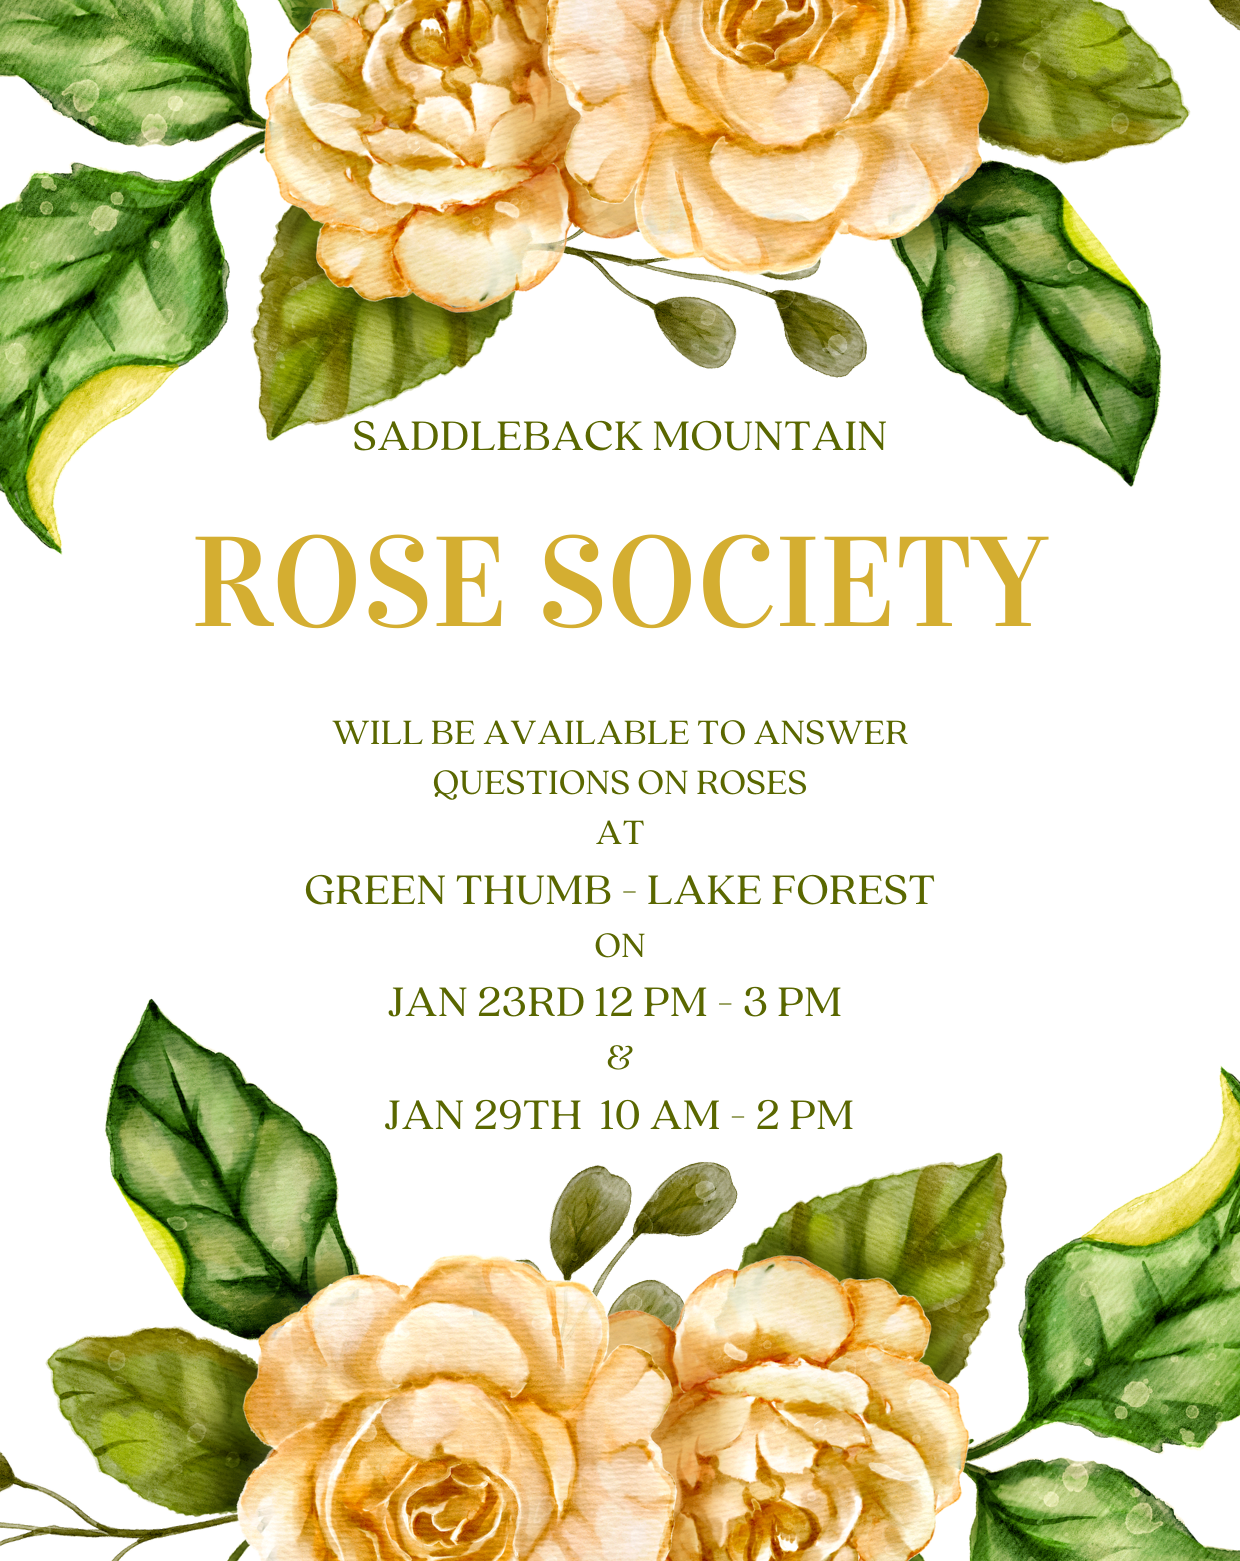 A rose society invitation showcasing yellow flowers on a white background from the best plant nursery near me.